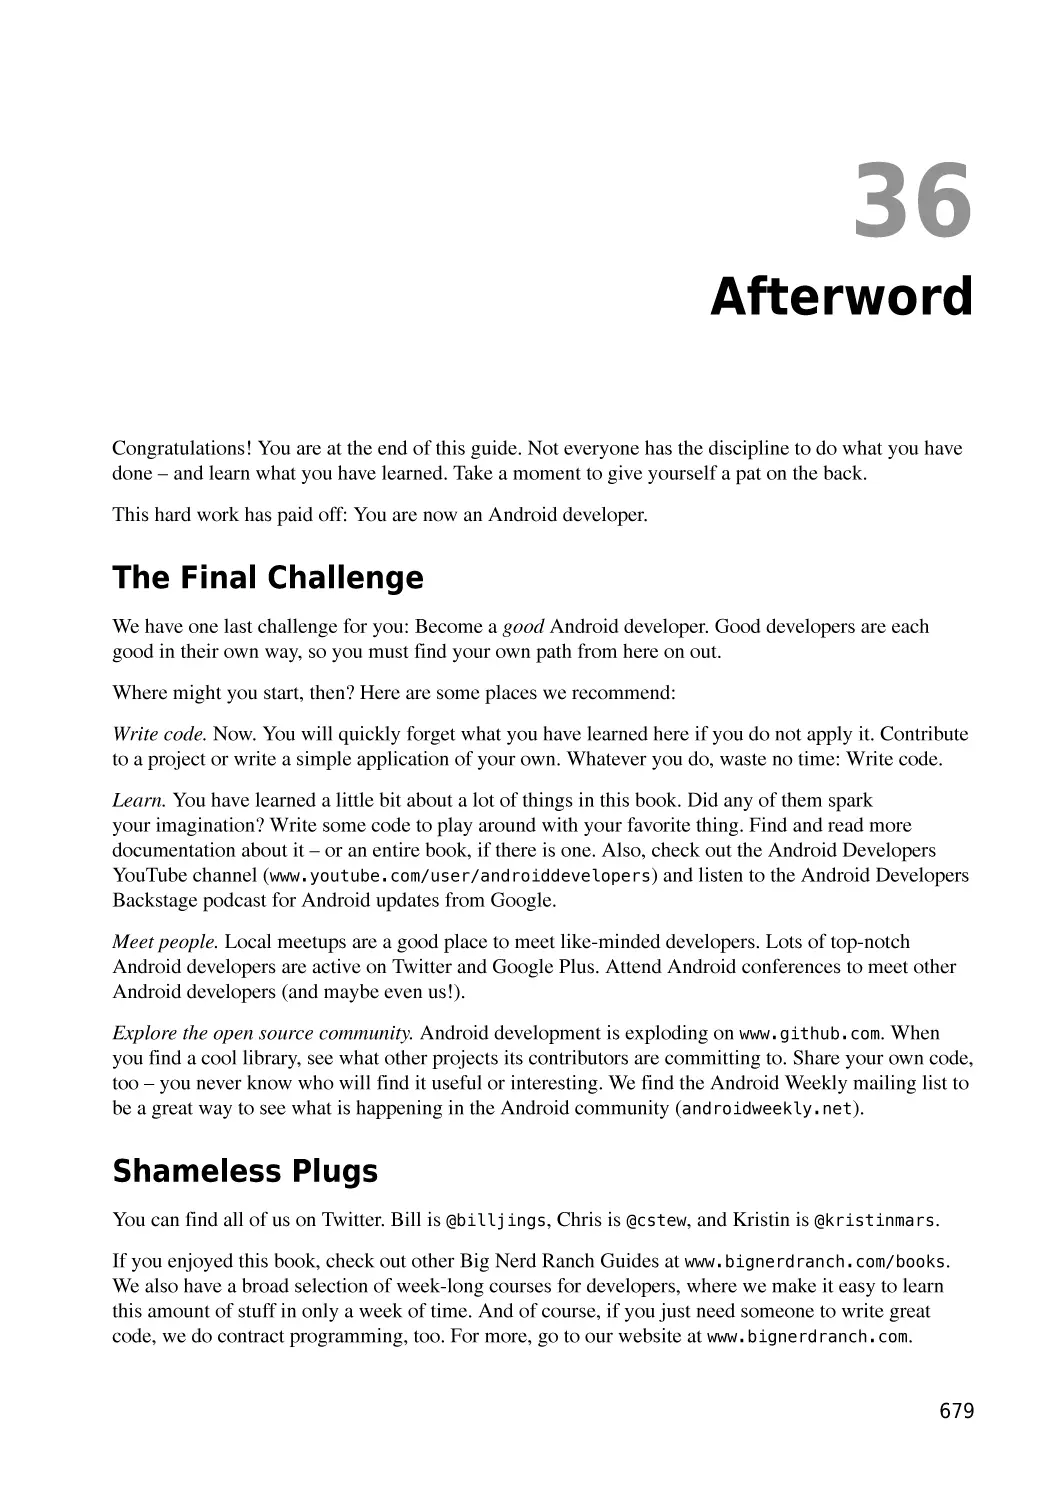 Chapter 36  Afterword
The Final Challenge
Shameless Plugs